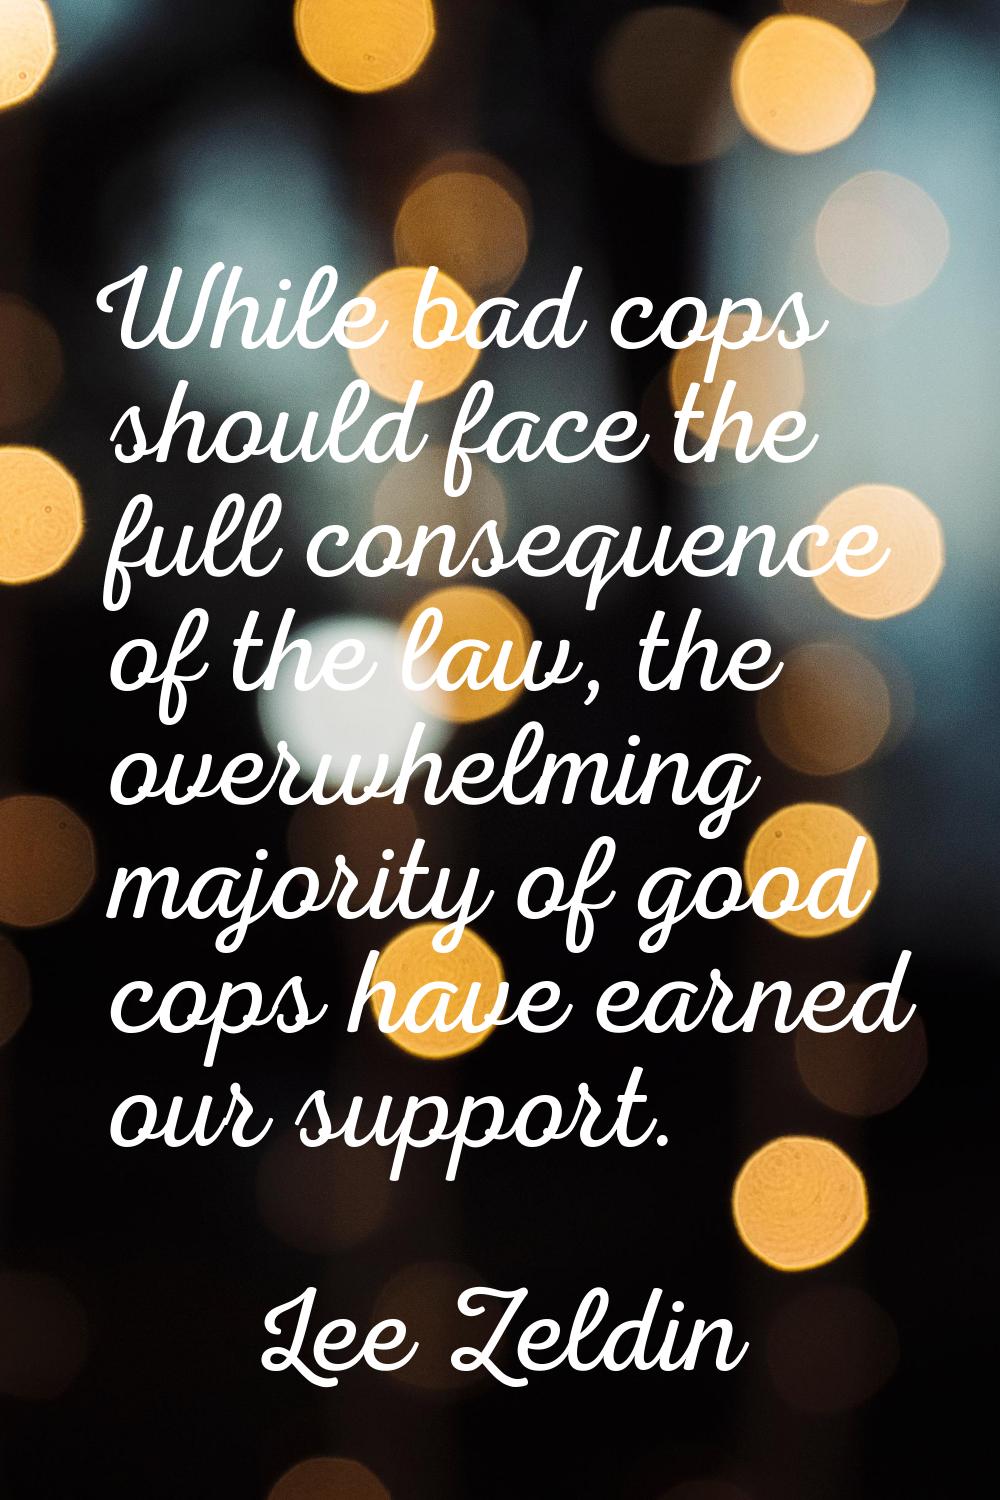 While bad cops should face the full consequence of the law, the overwhelming majority of good cops 